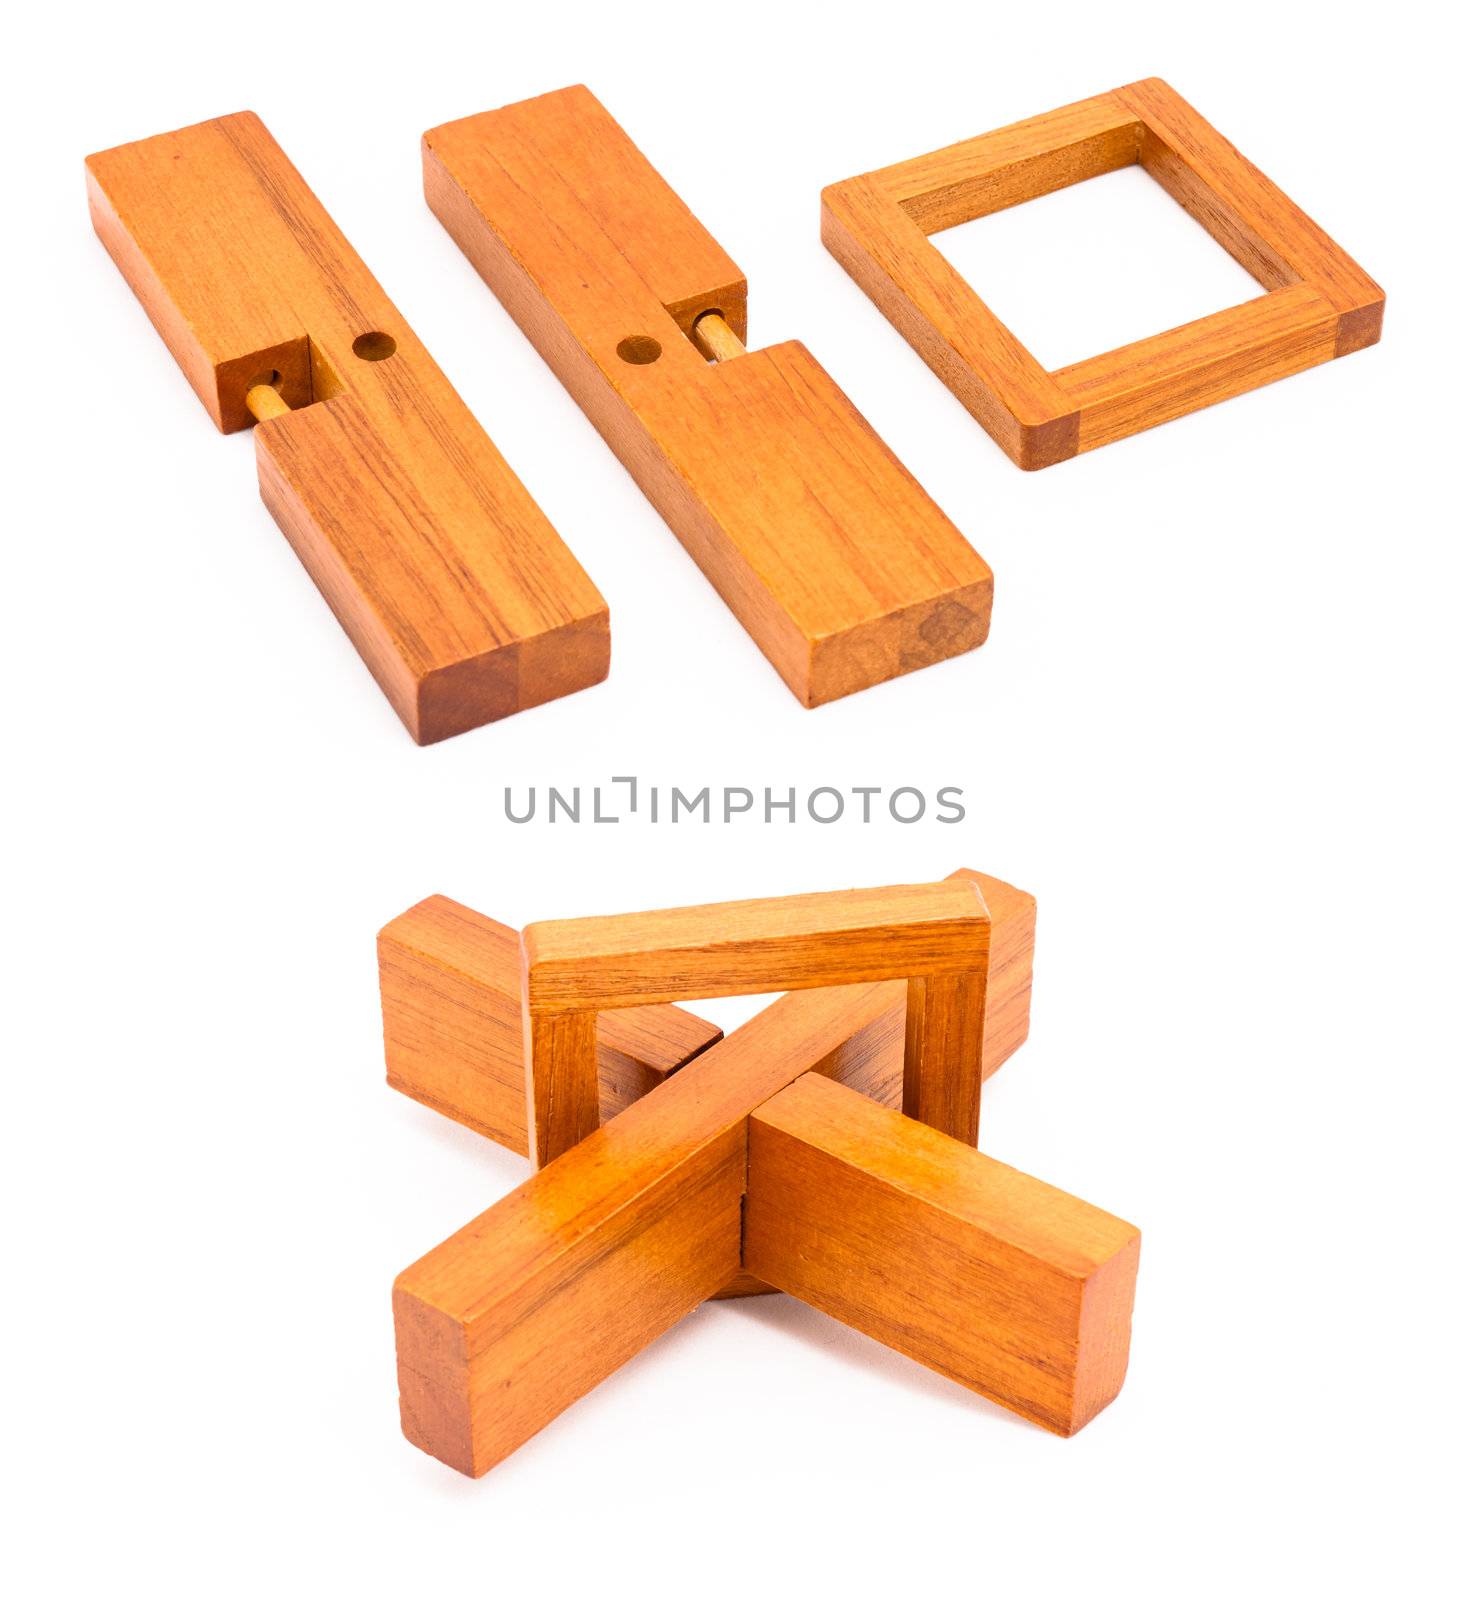 Wooden cross puzzle isolated on white in few different views